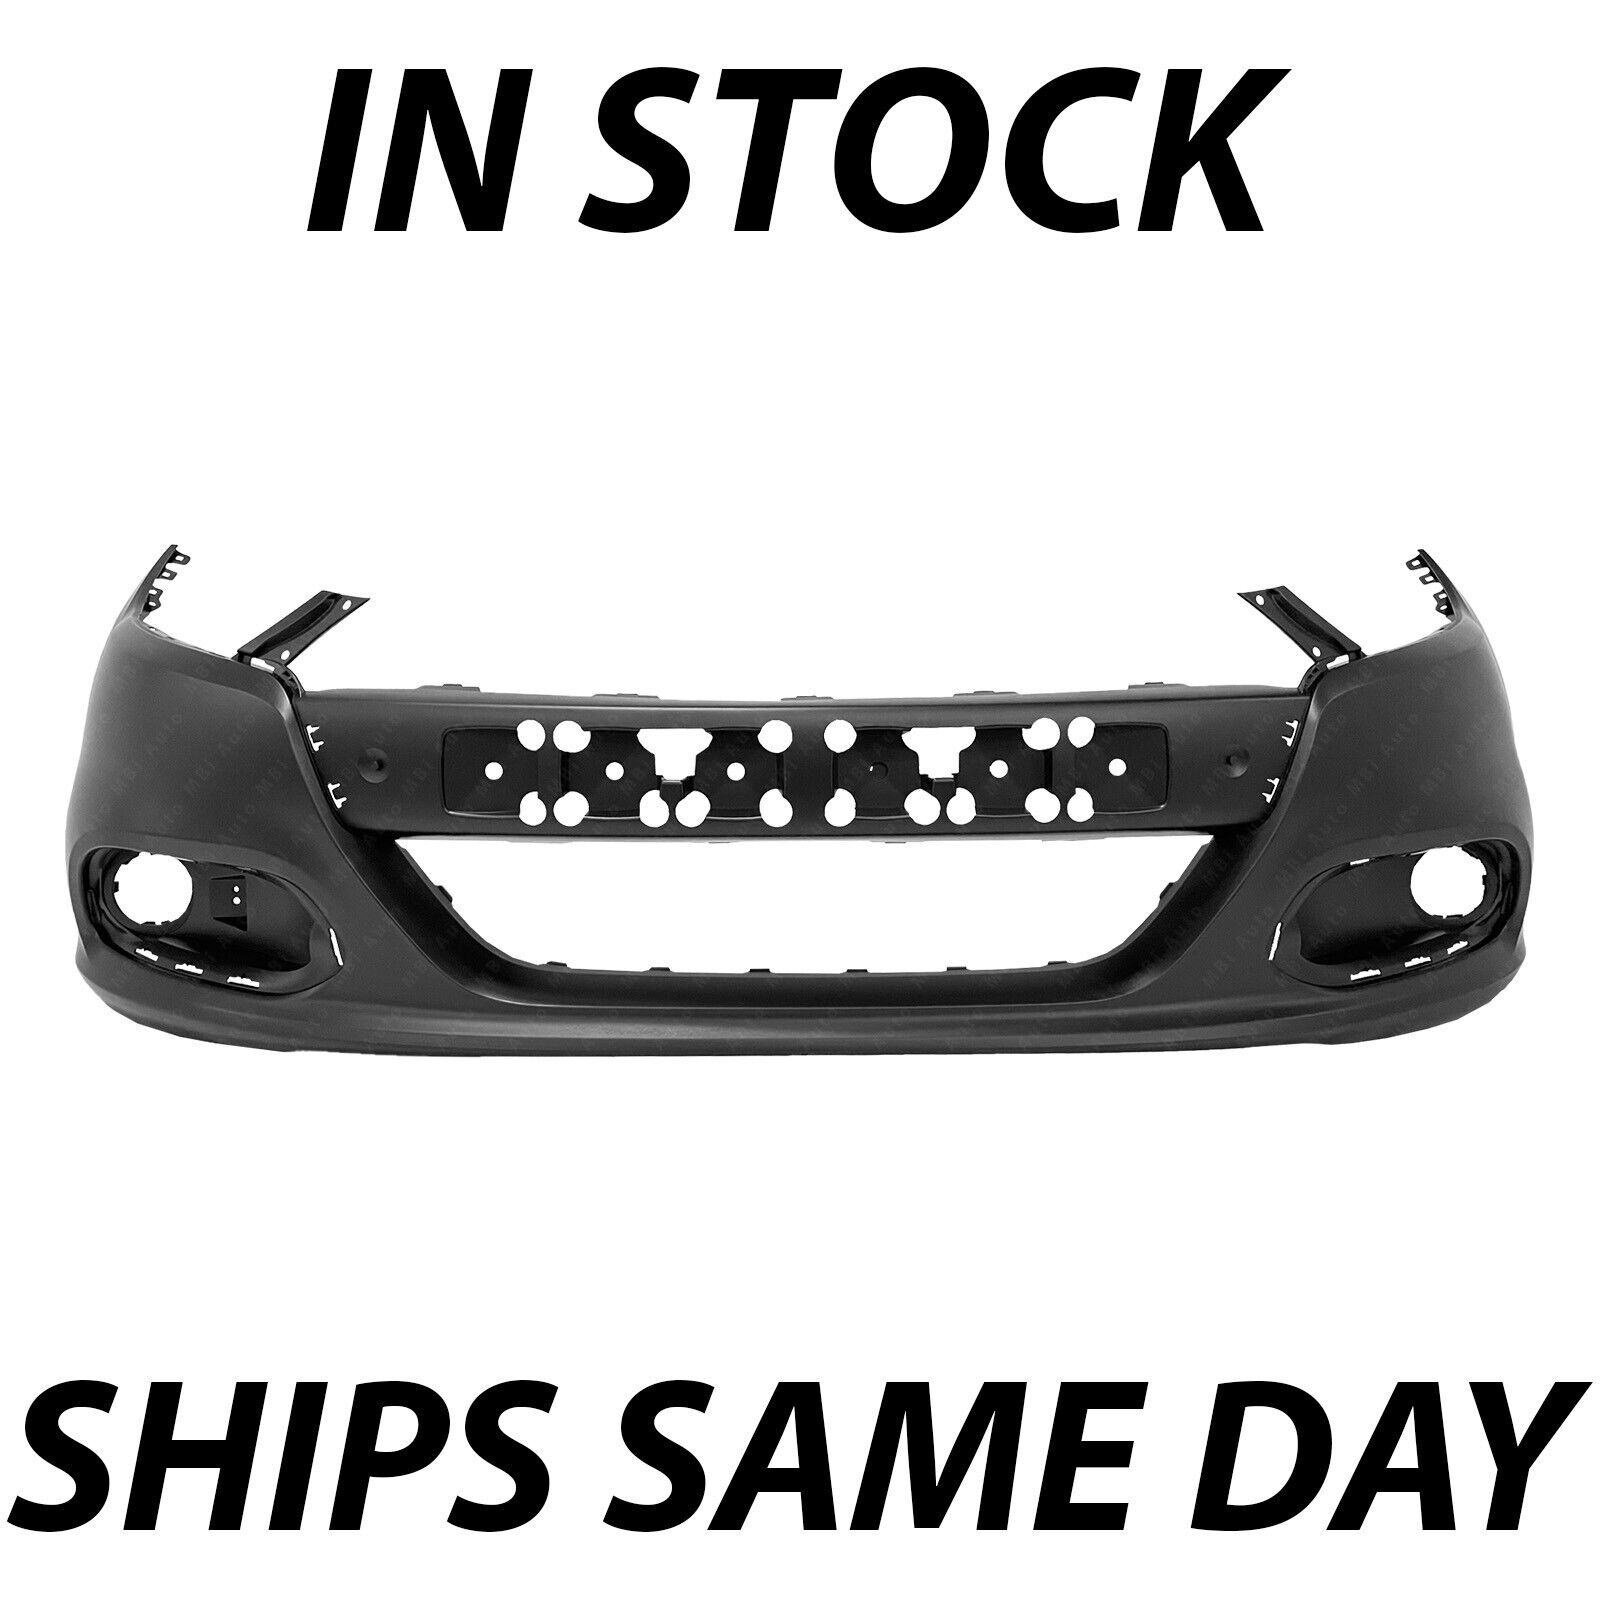 NEW Primered Front Bumper Cover Fascia Direct Fit for 2013-2016 Dodge Dart 13-16